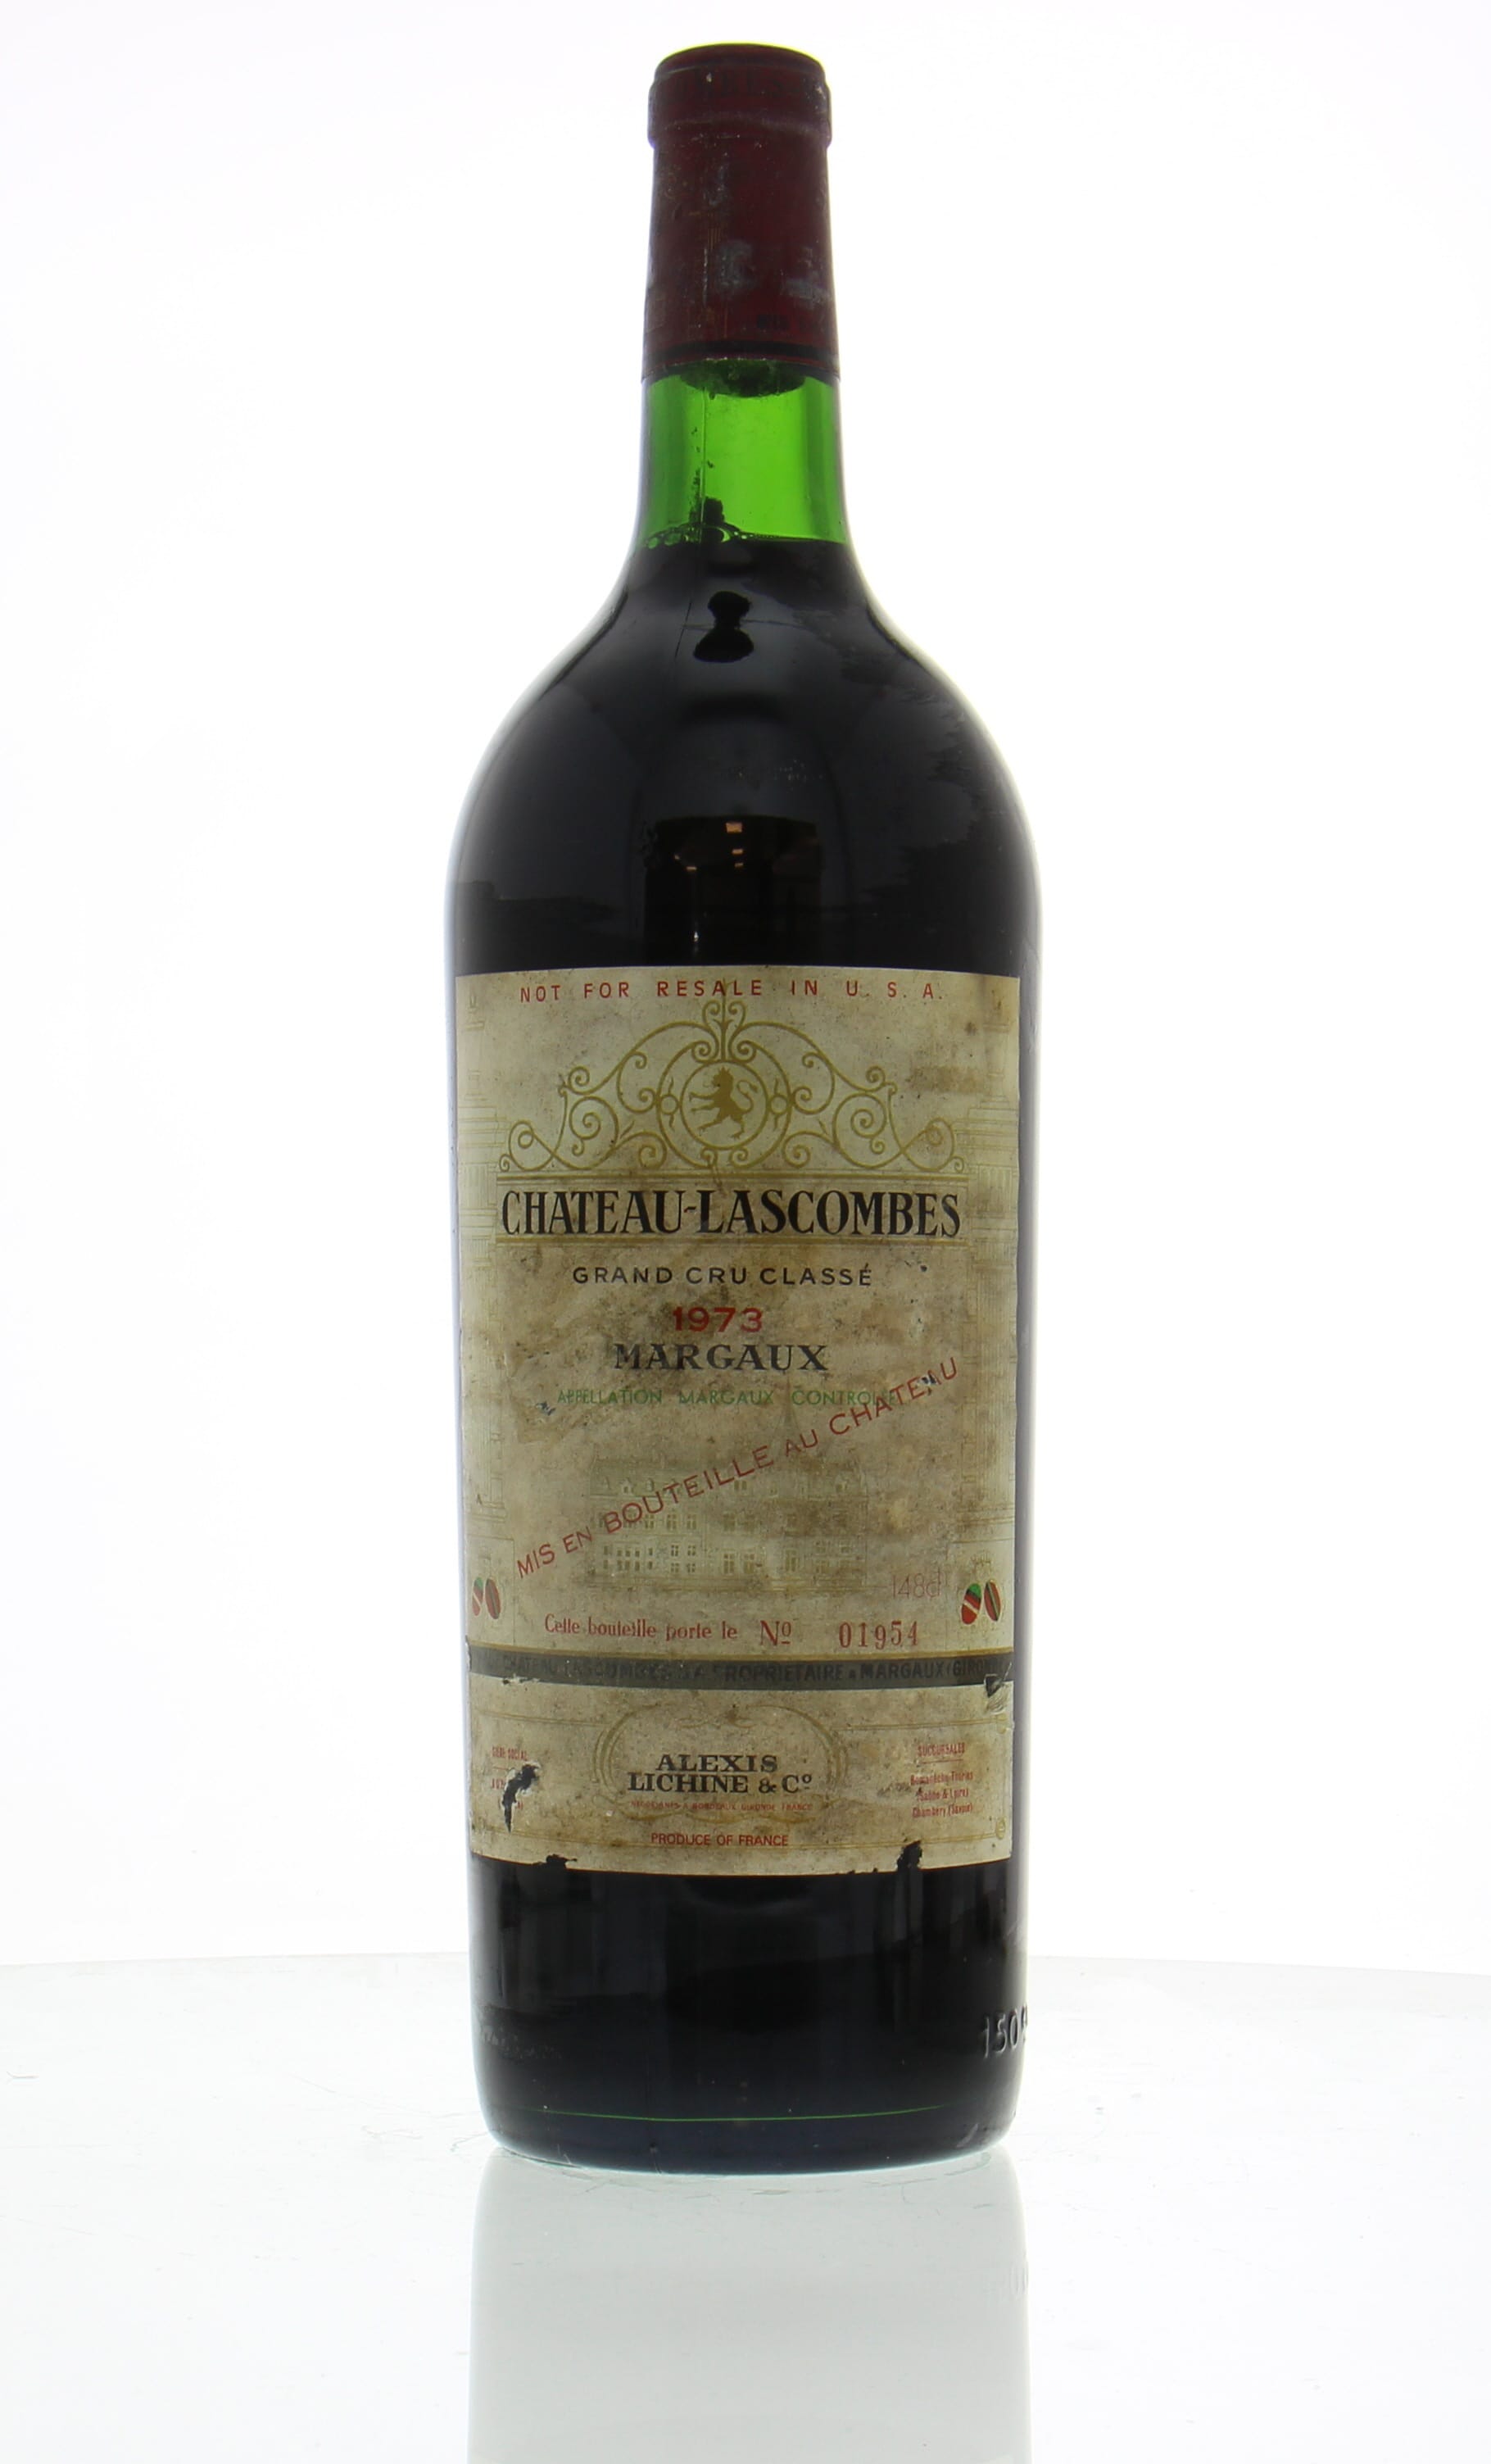 Chateau Lascombes - Chateau Lascombes 1973 Perfect